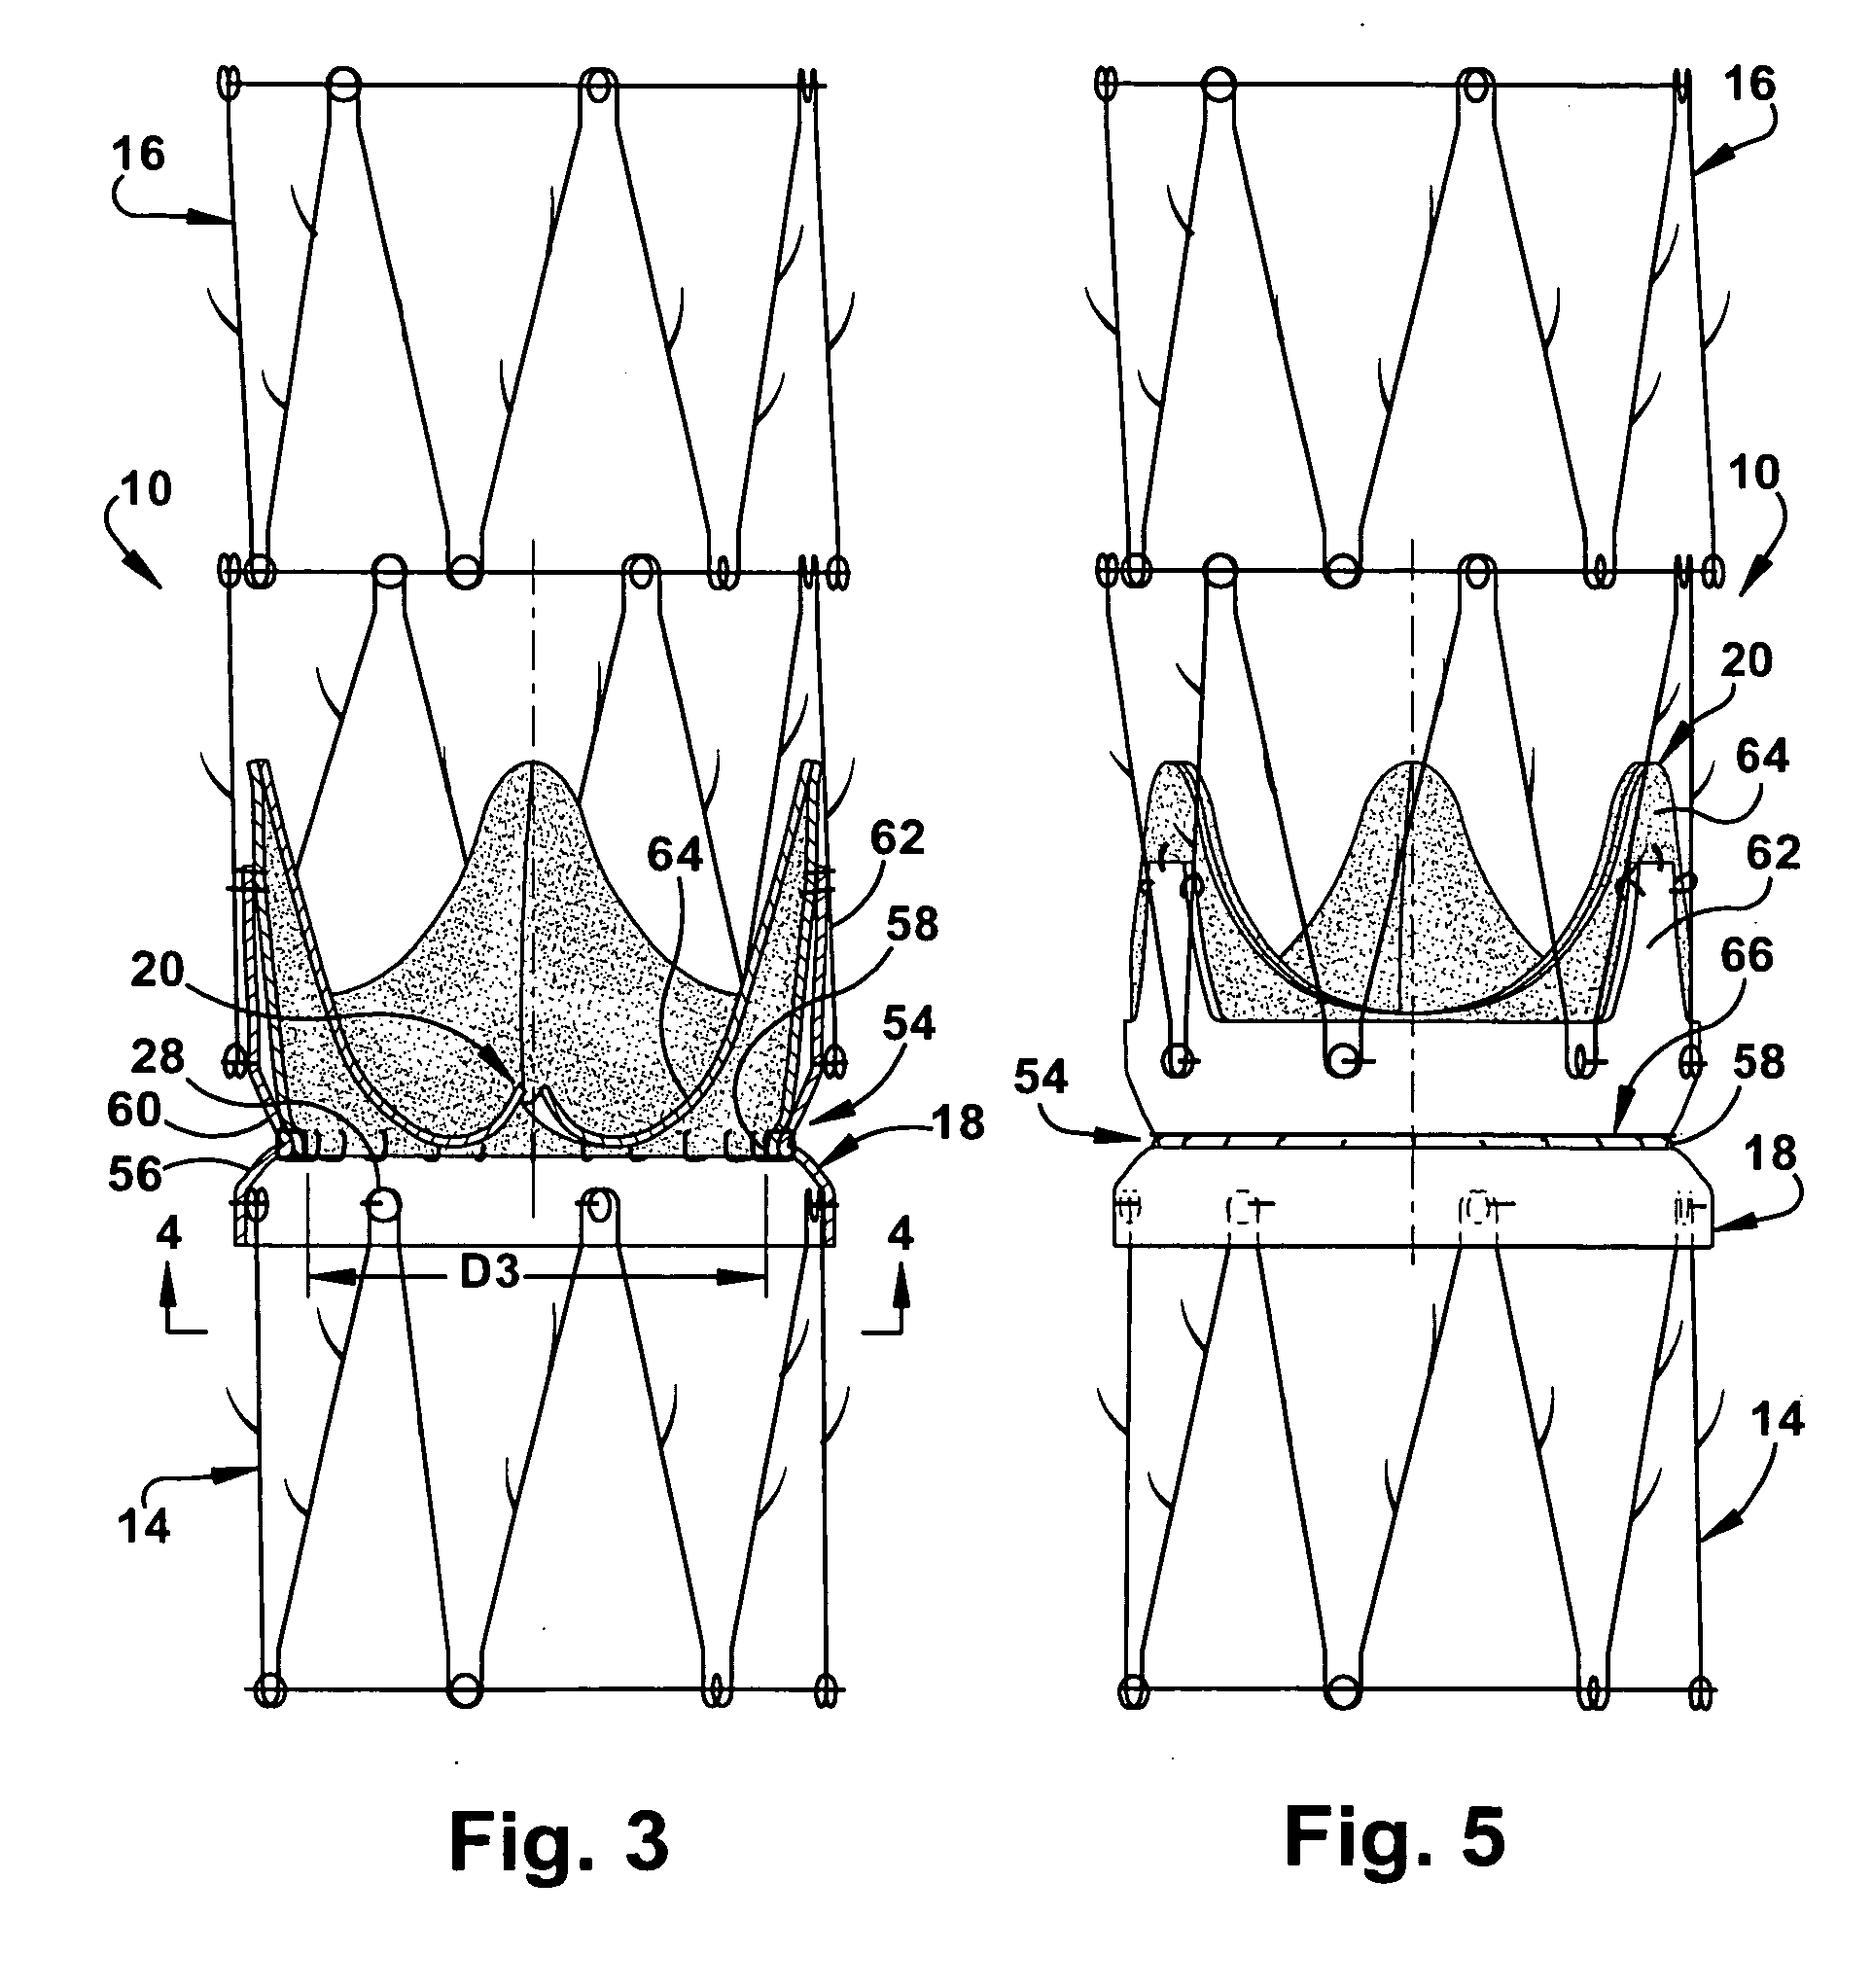 Apparatus and methods for repairing the function of a diseased valve and method for making same